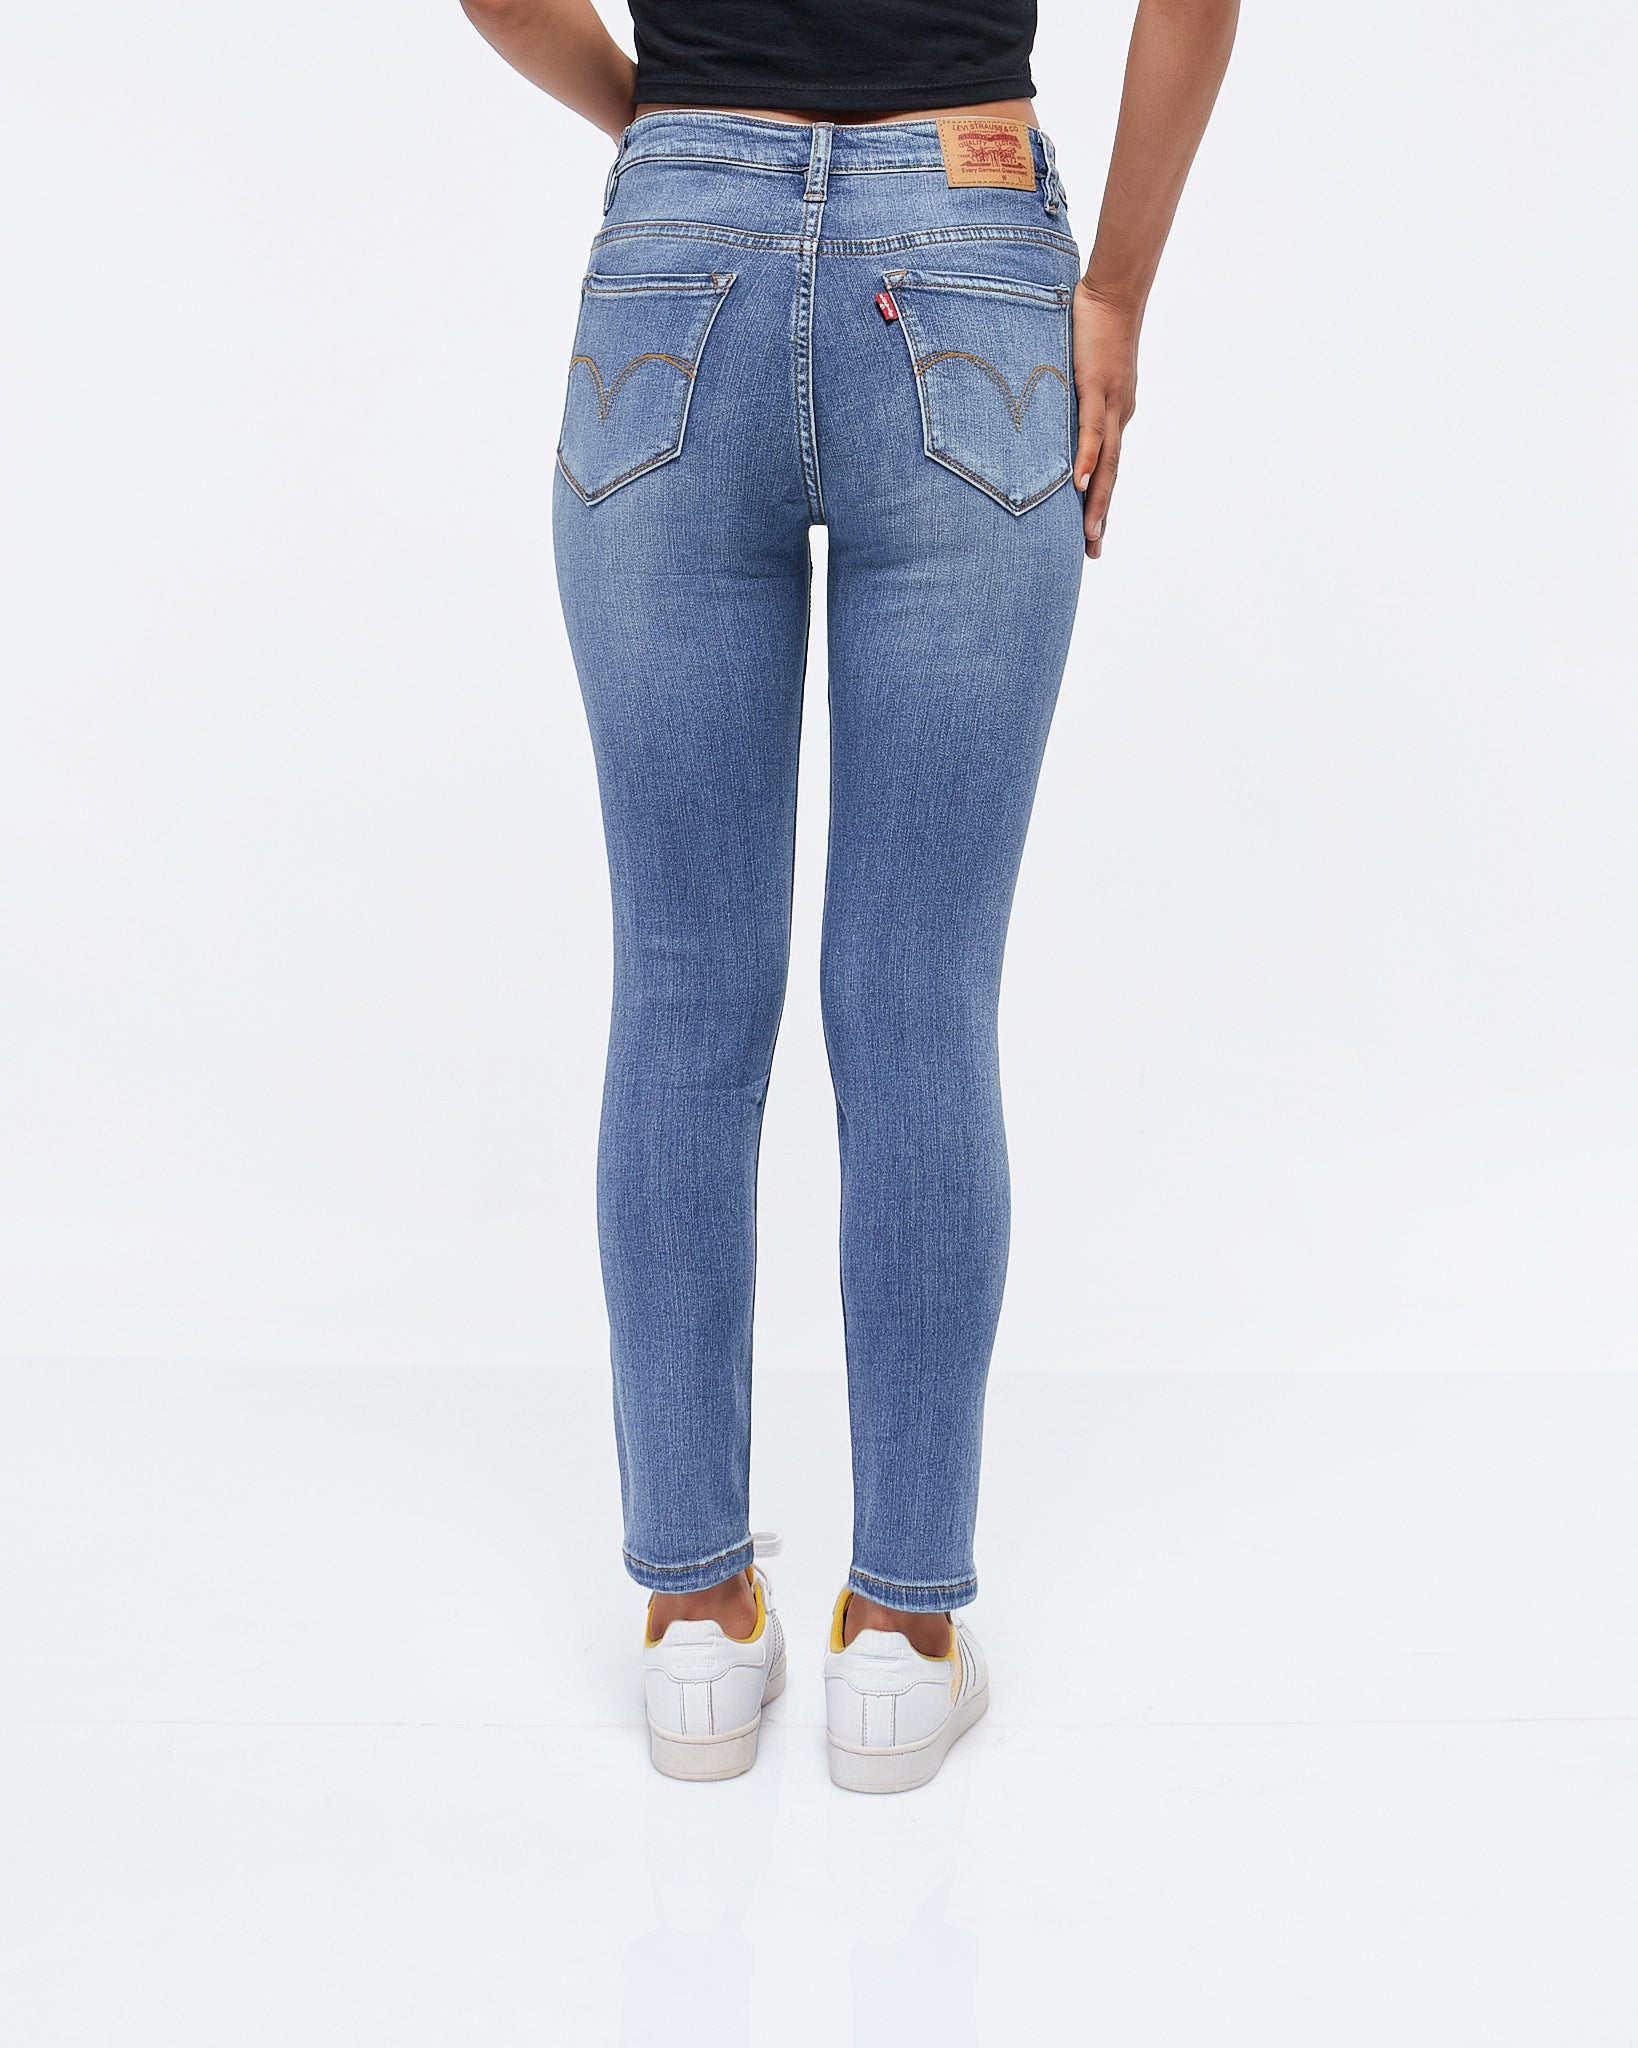 MOI OUTFIT-High Rise Slim Fit 711 Lady Jeans 18.90